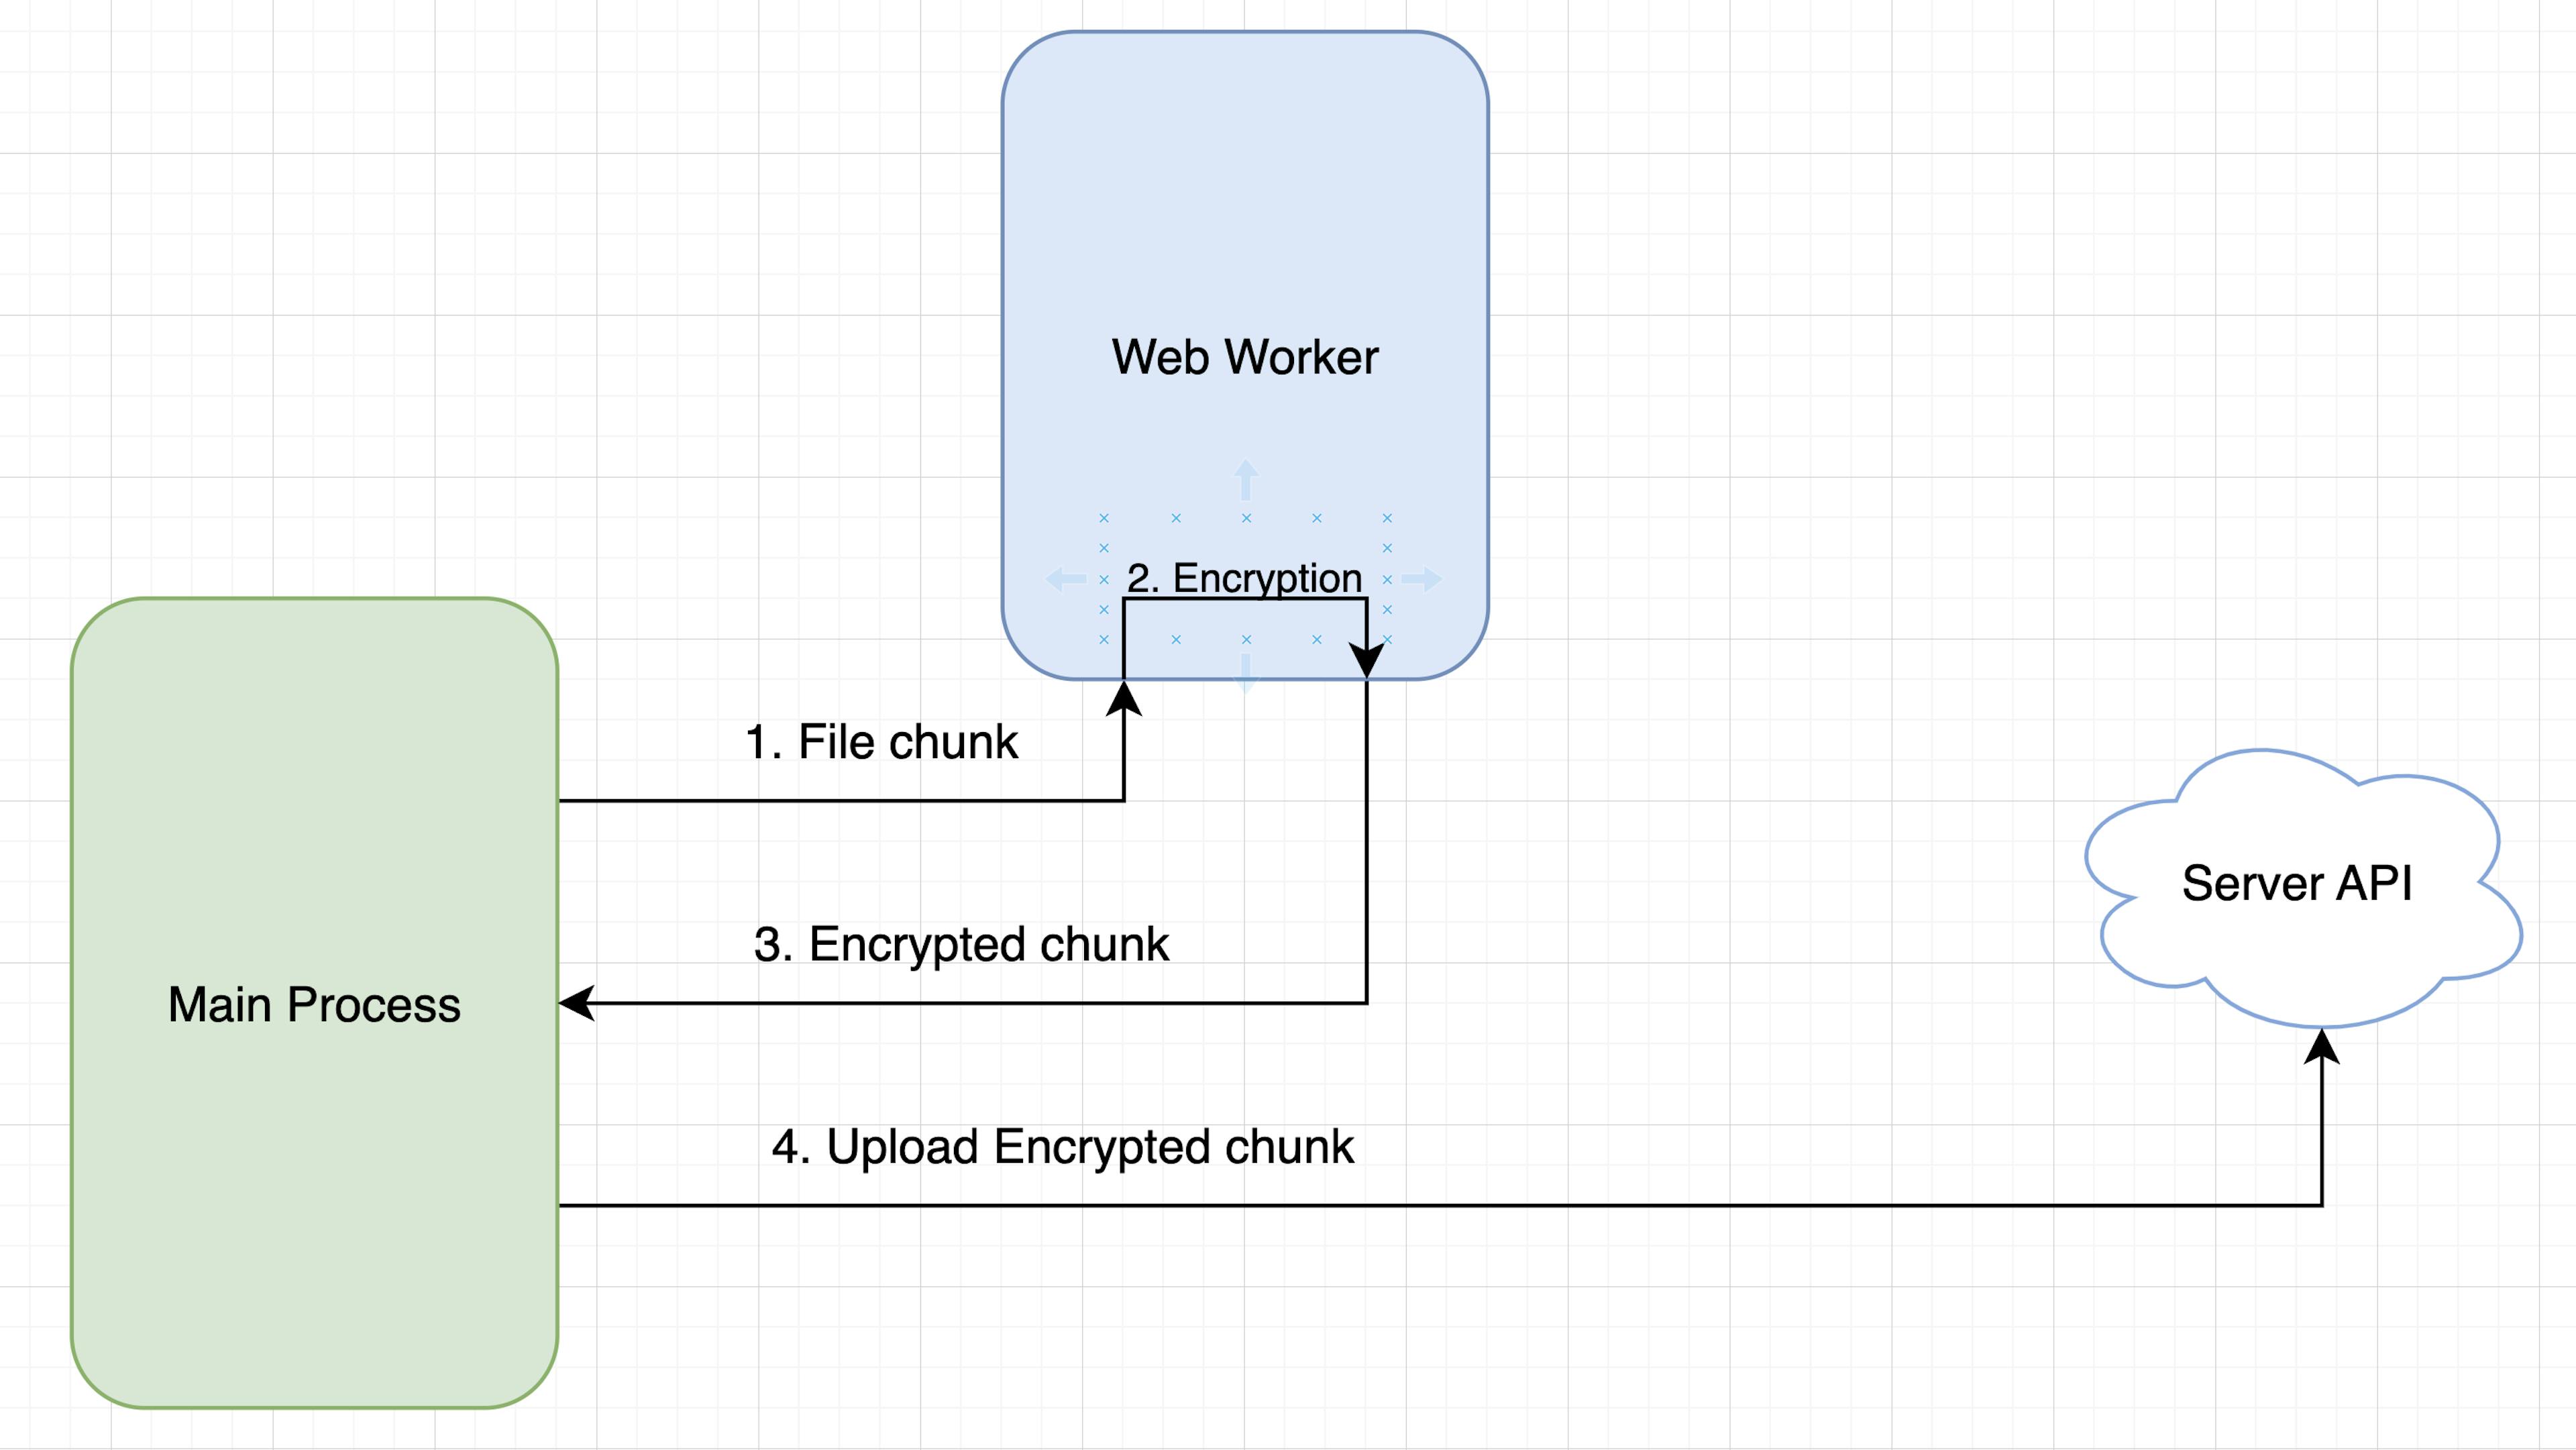 Image 2 - Schema of file uploading with encryption in separate thread